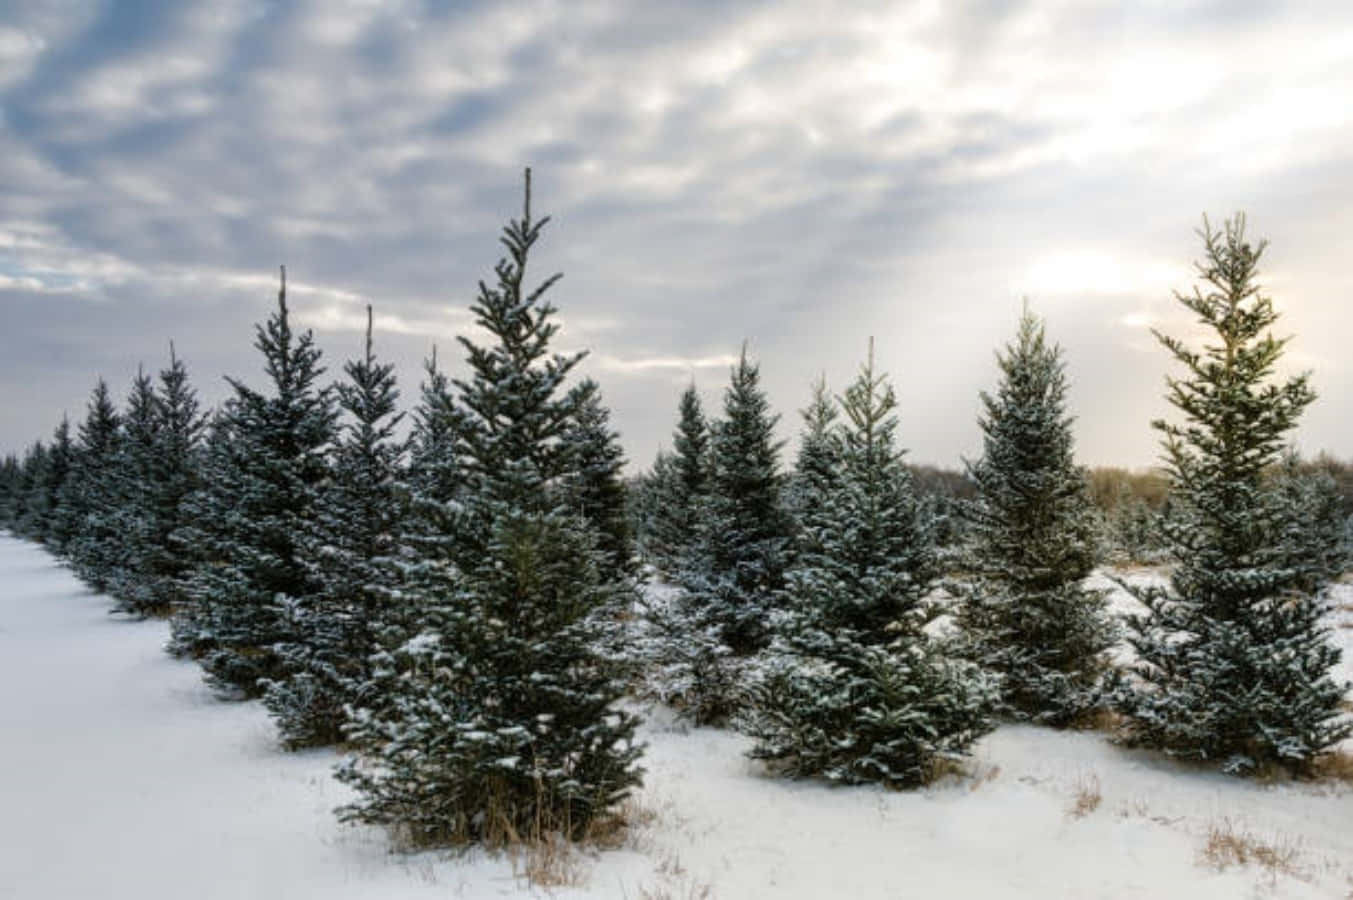 Download Snowy Christmas Tree Farm Picture | Wallpapers.com